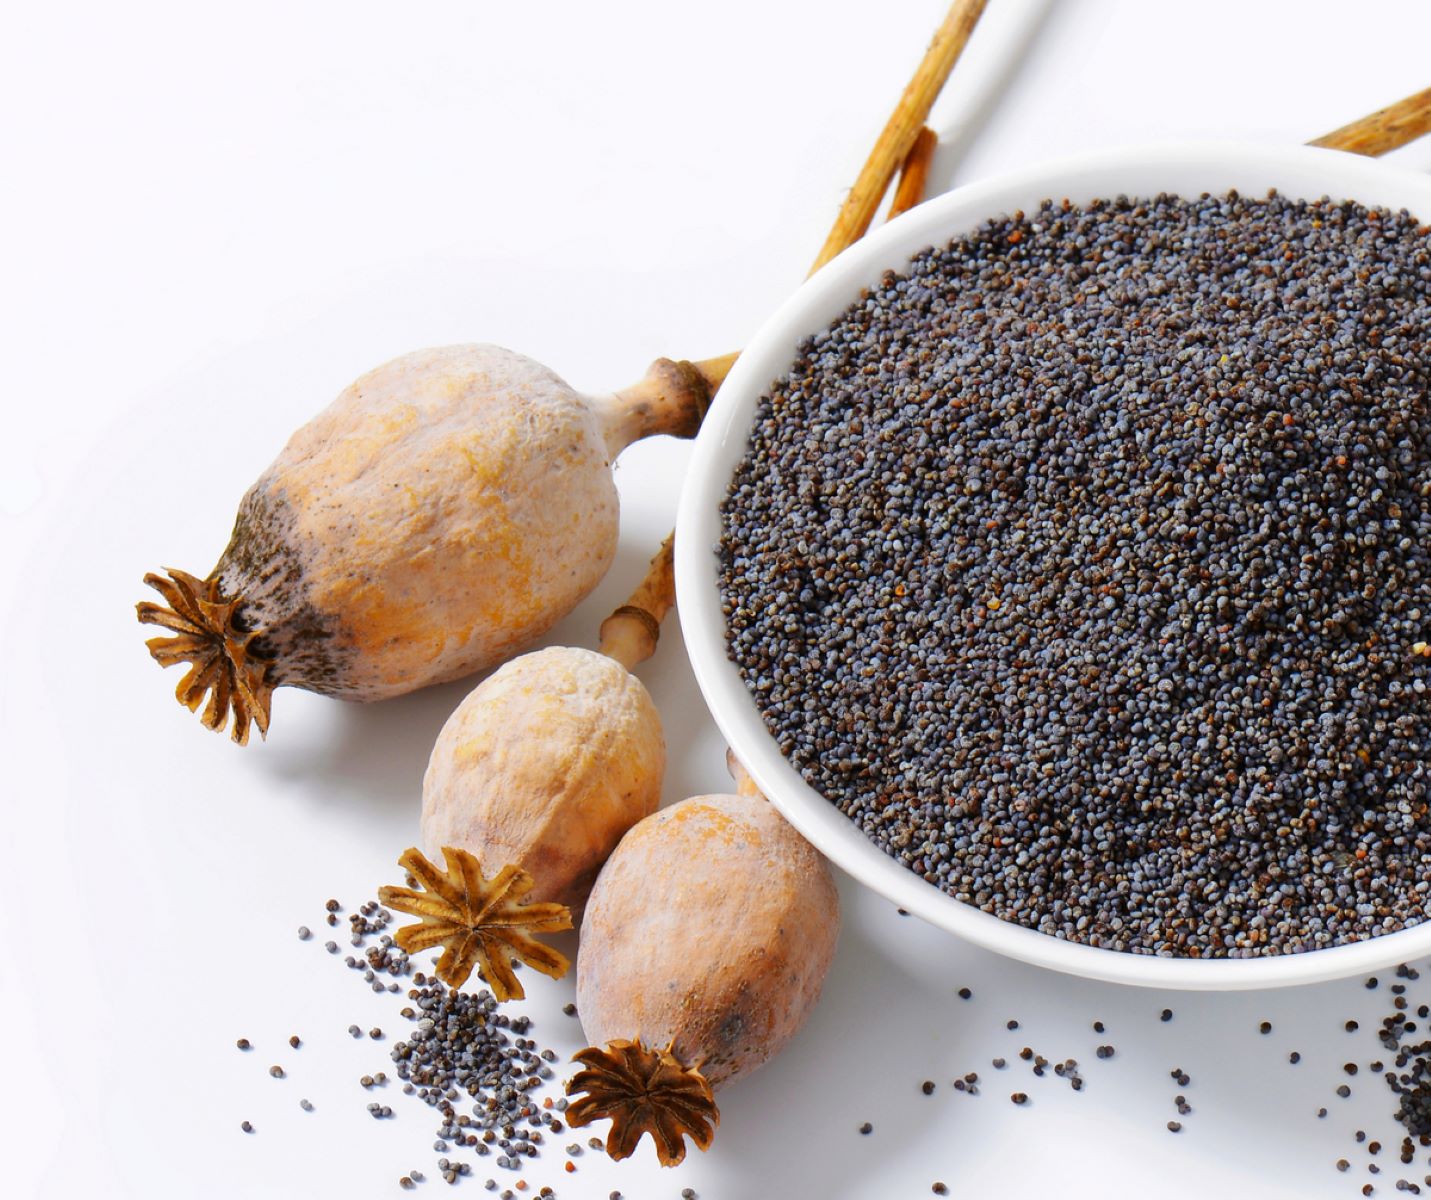 What To Do With Poppy Seeds